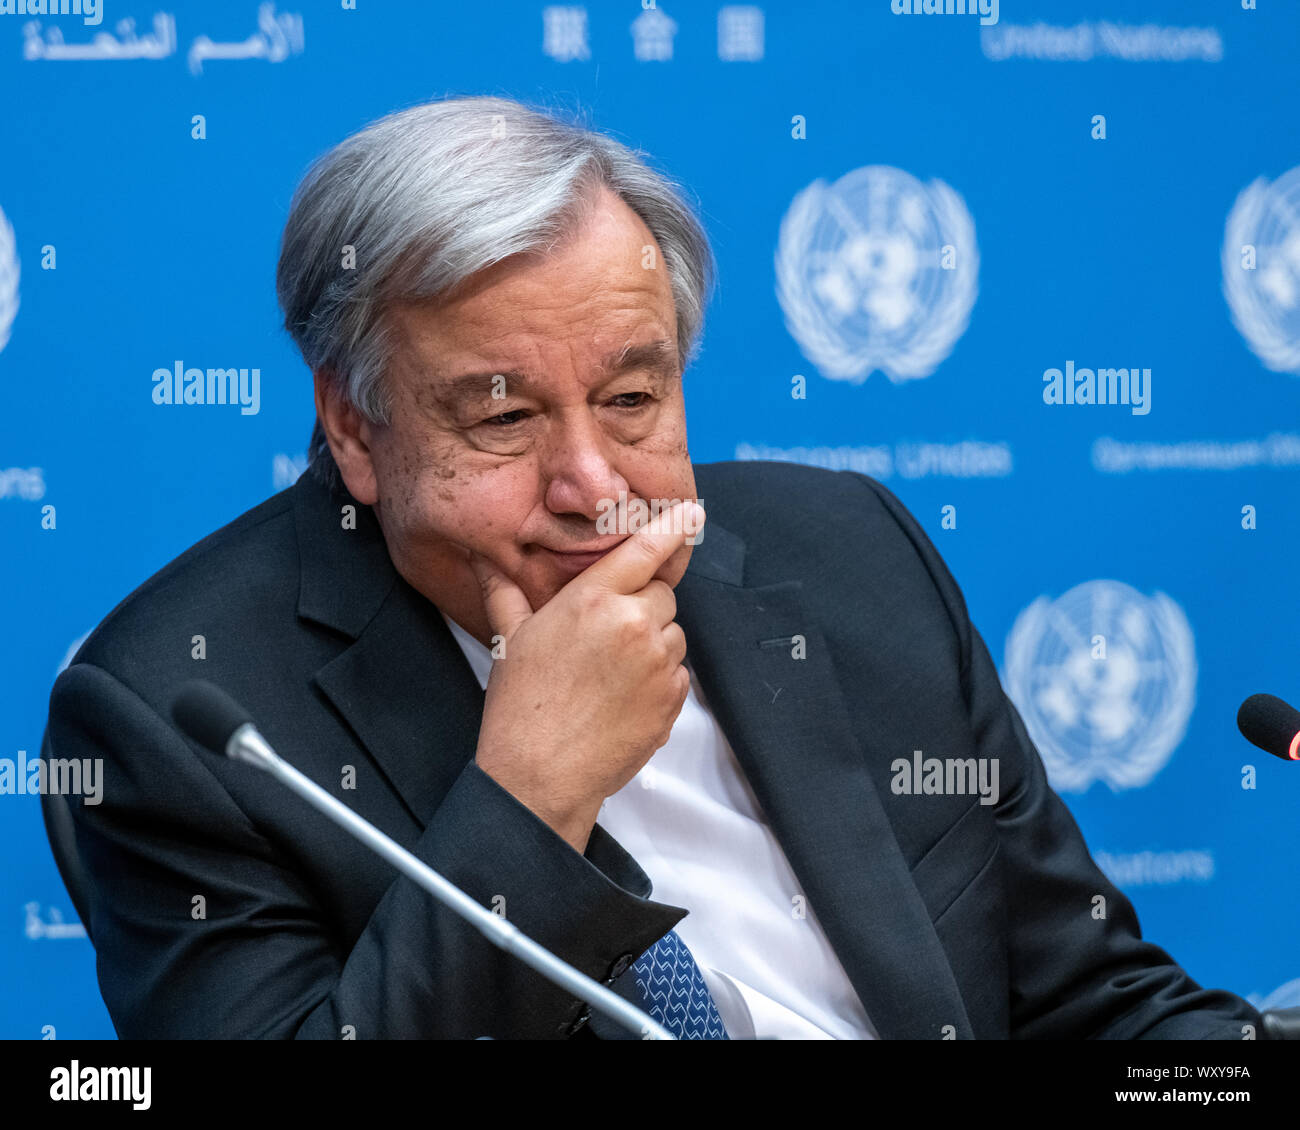 New York, USA,  18 September 2019.  United Nations Secretary-General Antonio Guterres ponders a question during a news briefing to mark the opening of the 74th session of the UN General Assembly in New York City.   Credit: Enrique Shore/Alamy Live News Stock Photo